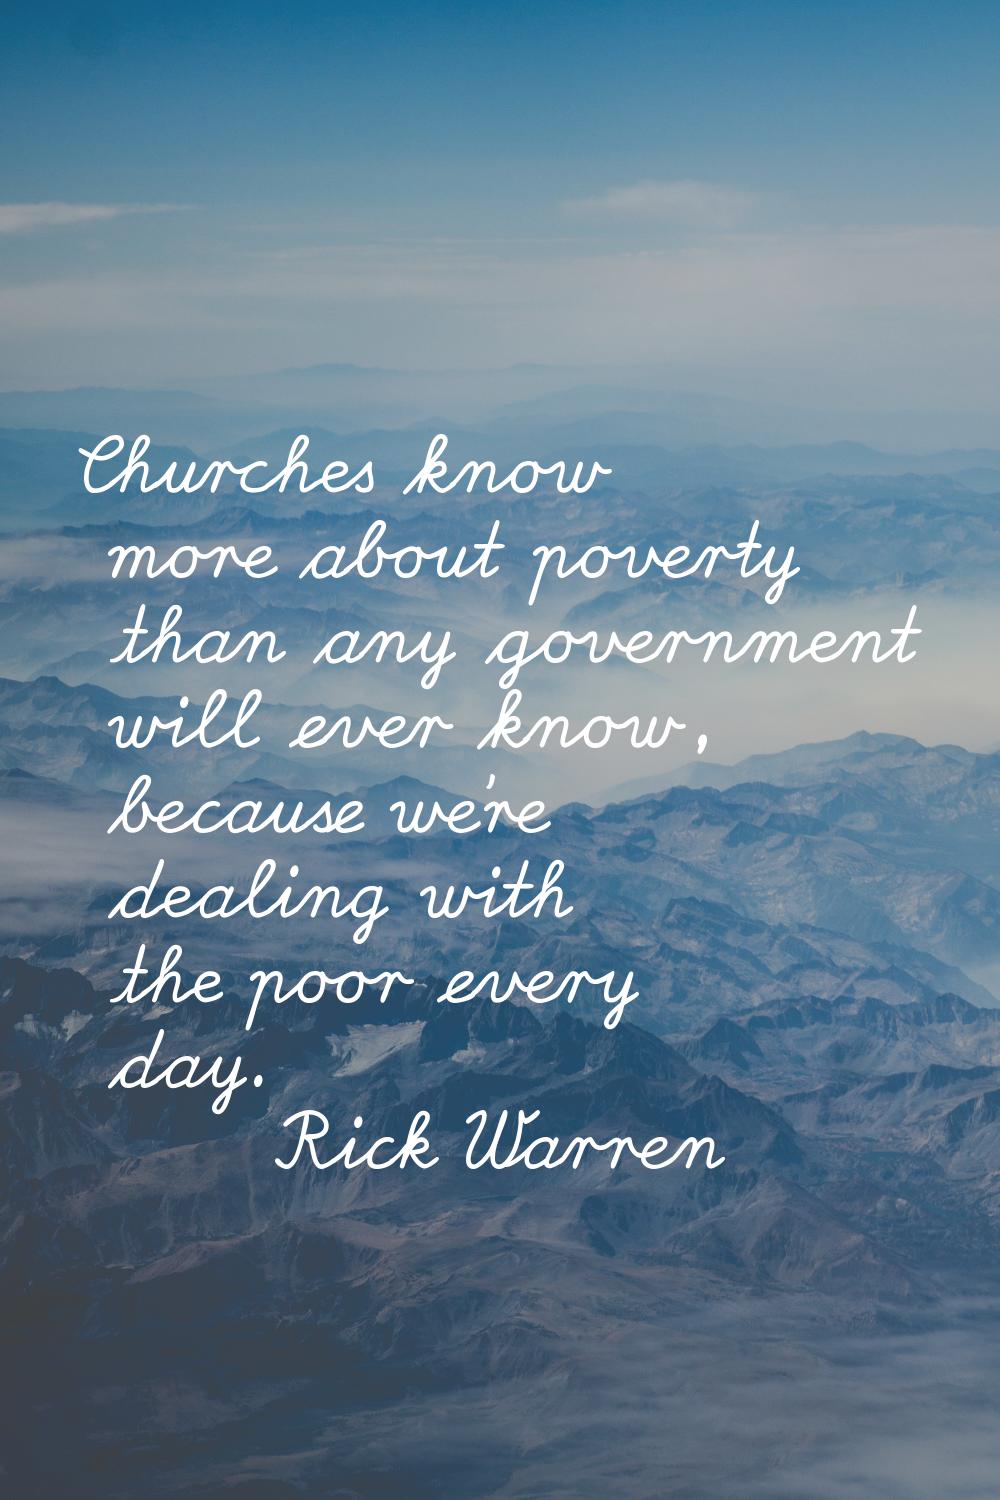 Churches know more about poverty than any government will ever know, because we're dealing with the